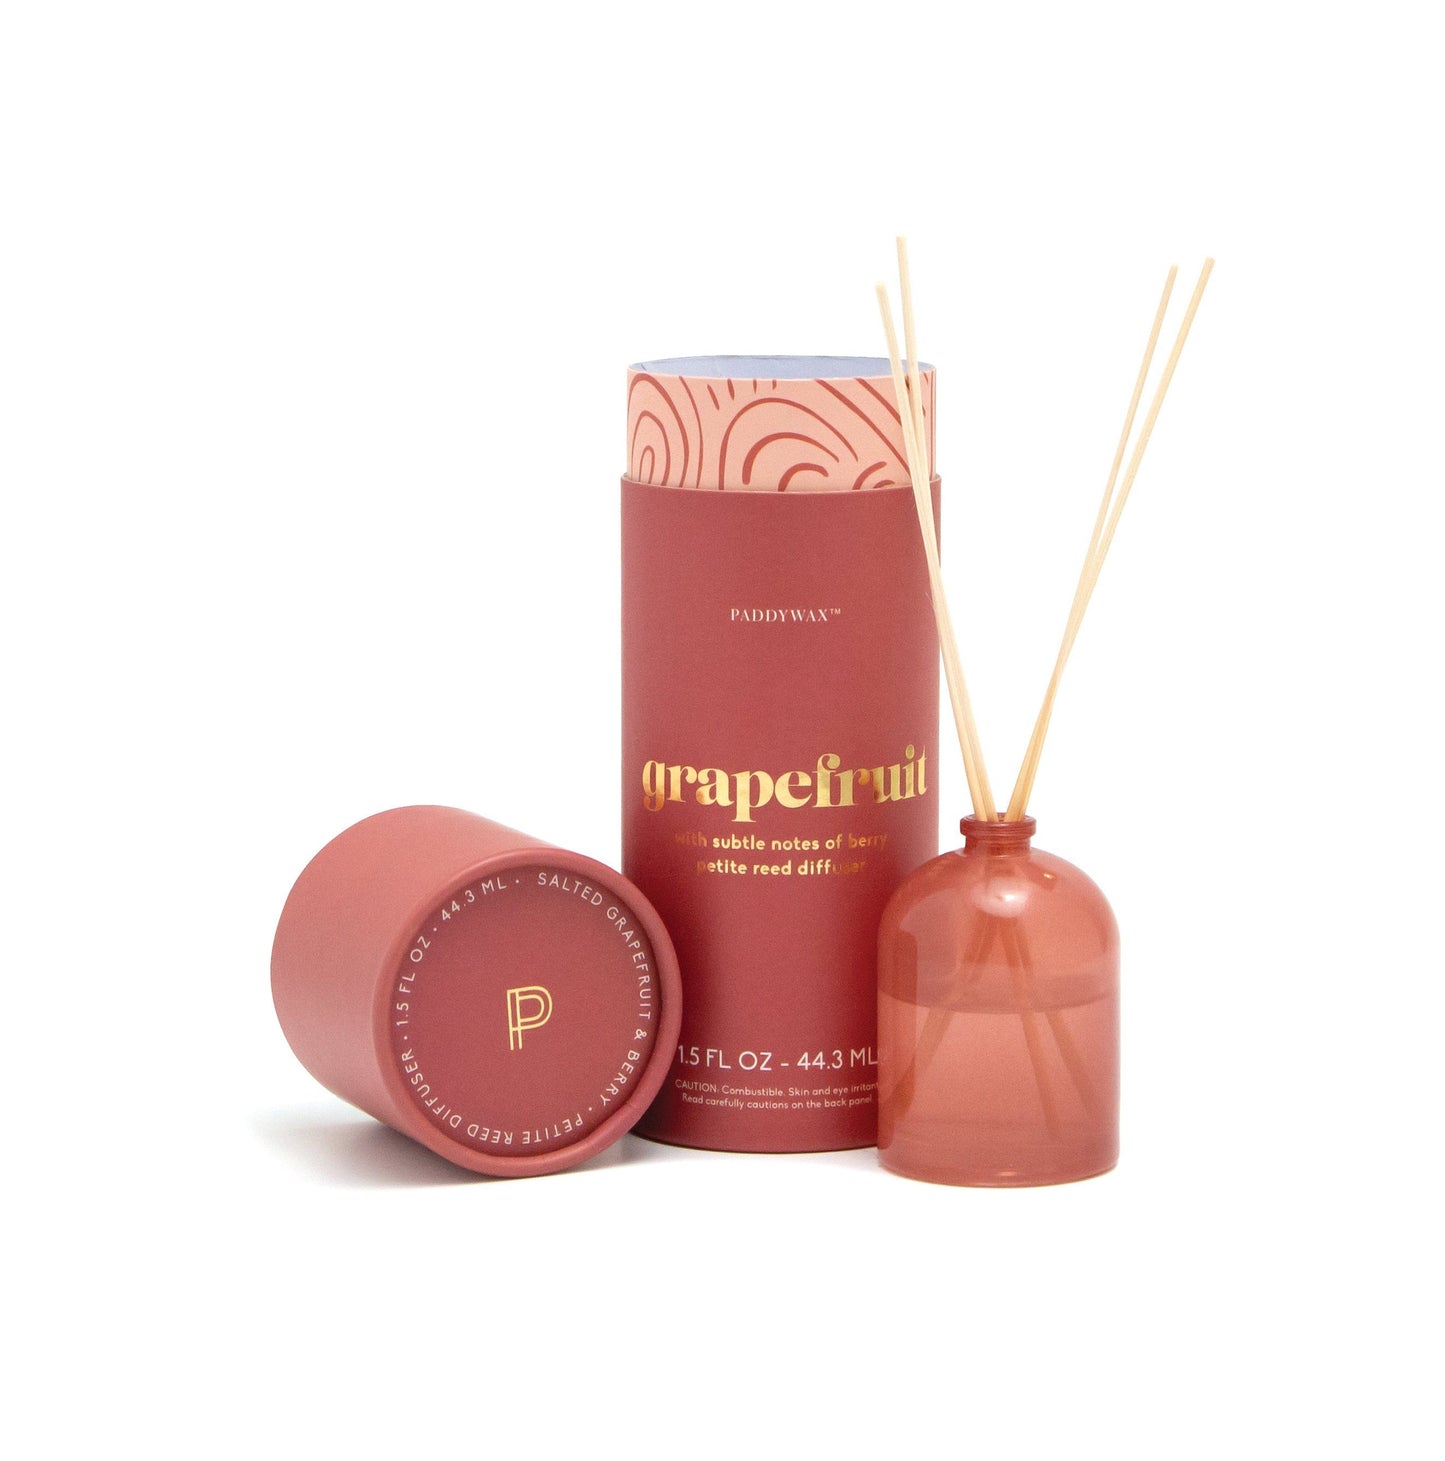 Petite Reed Diffuser - Grapefruit - red colored glass vessel